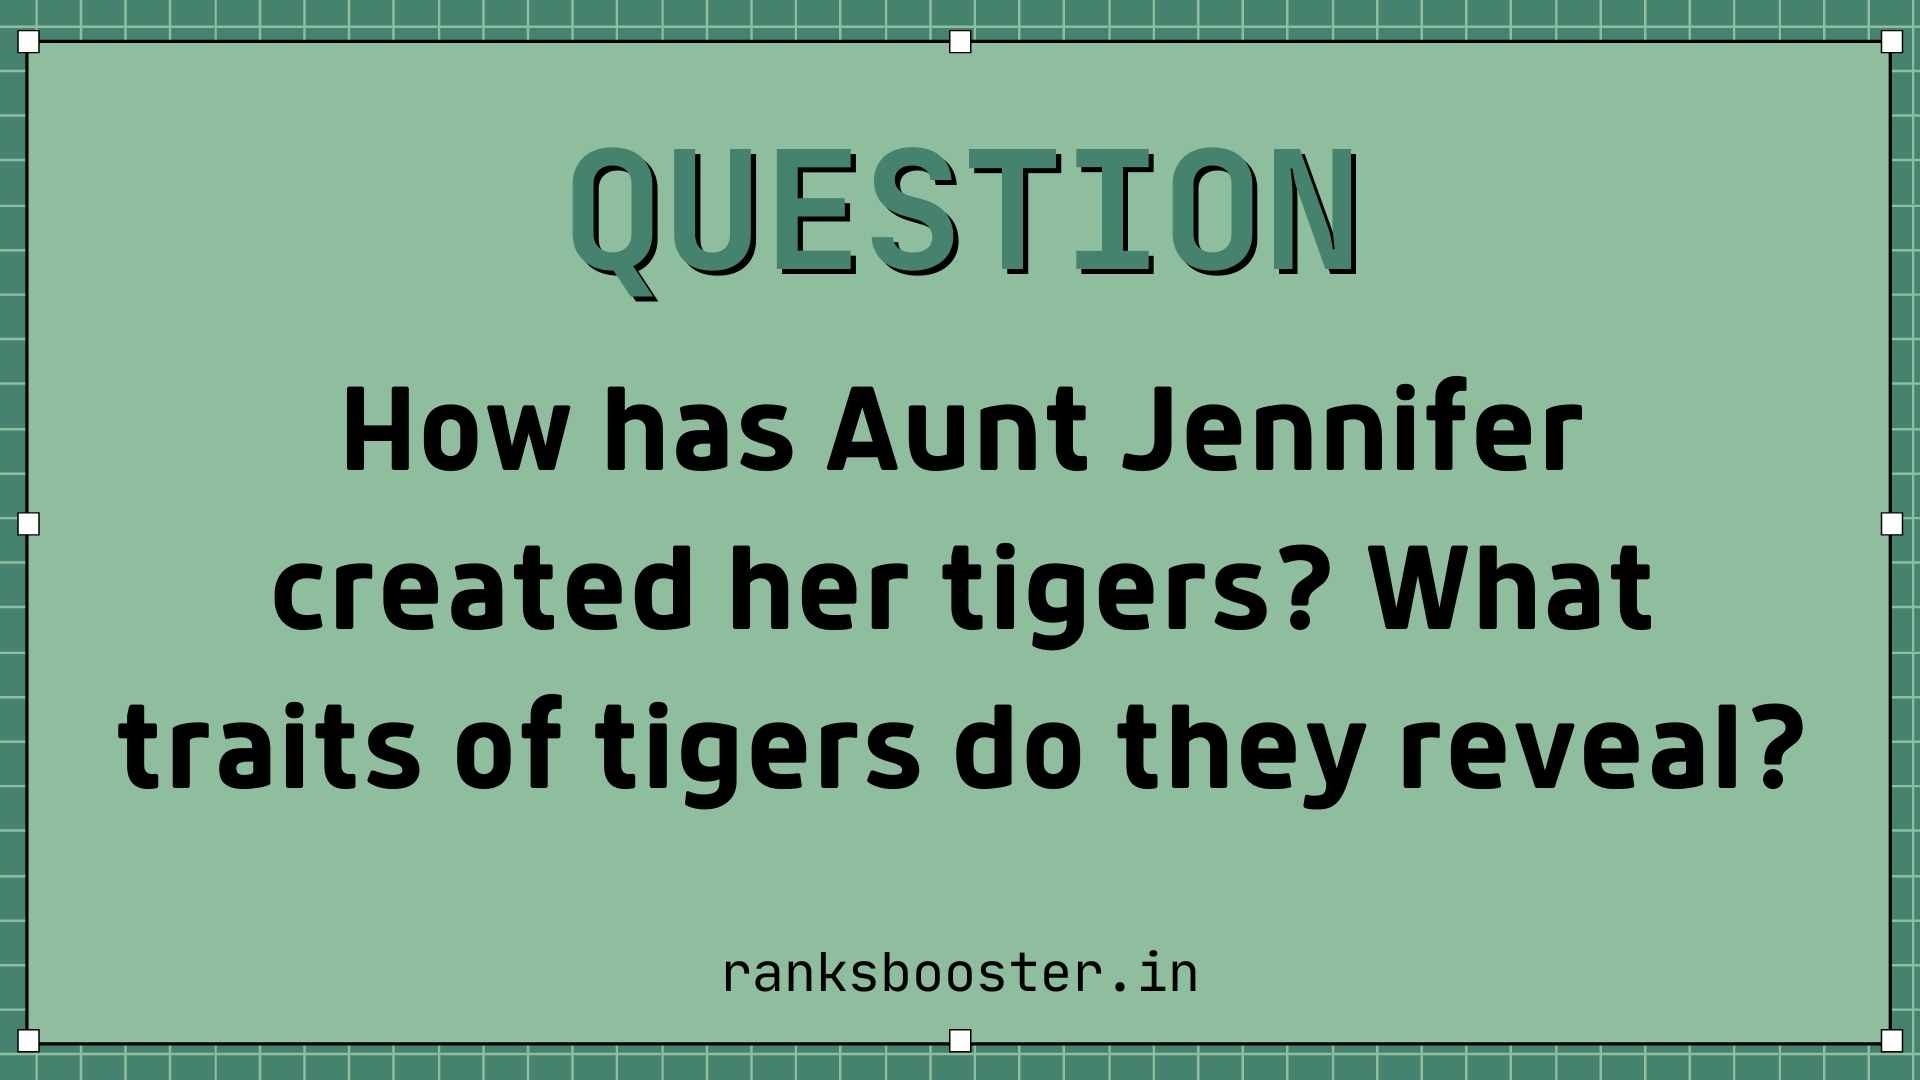 How has Aunt Jennifer created her tigers? What traits of tigers do they reveal?